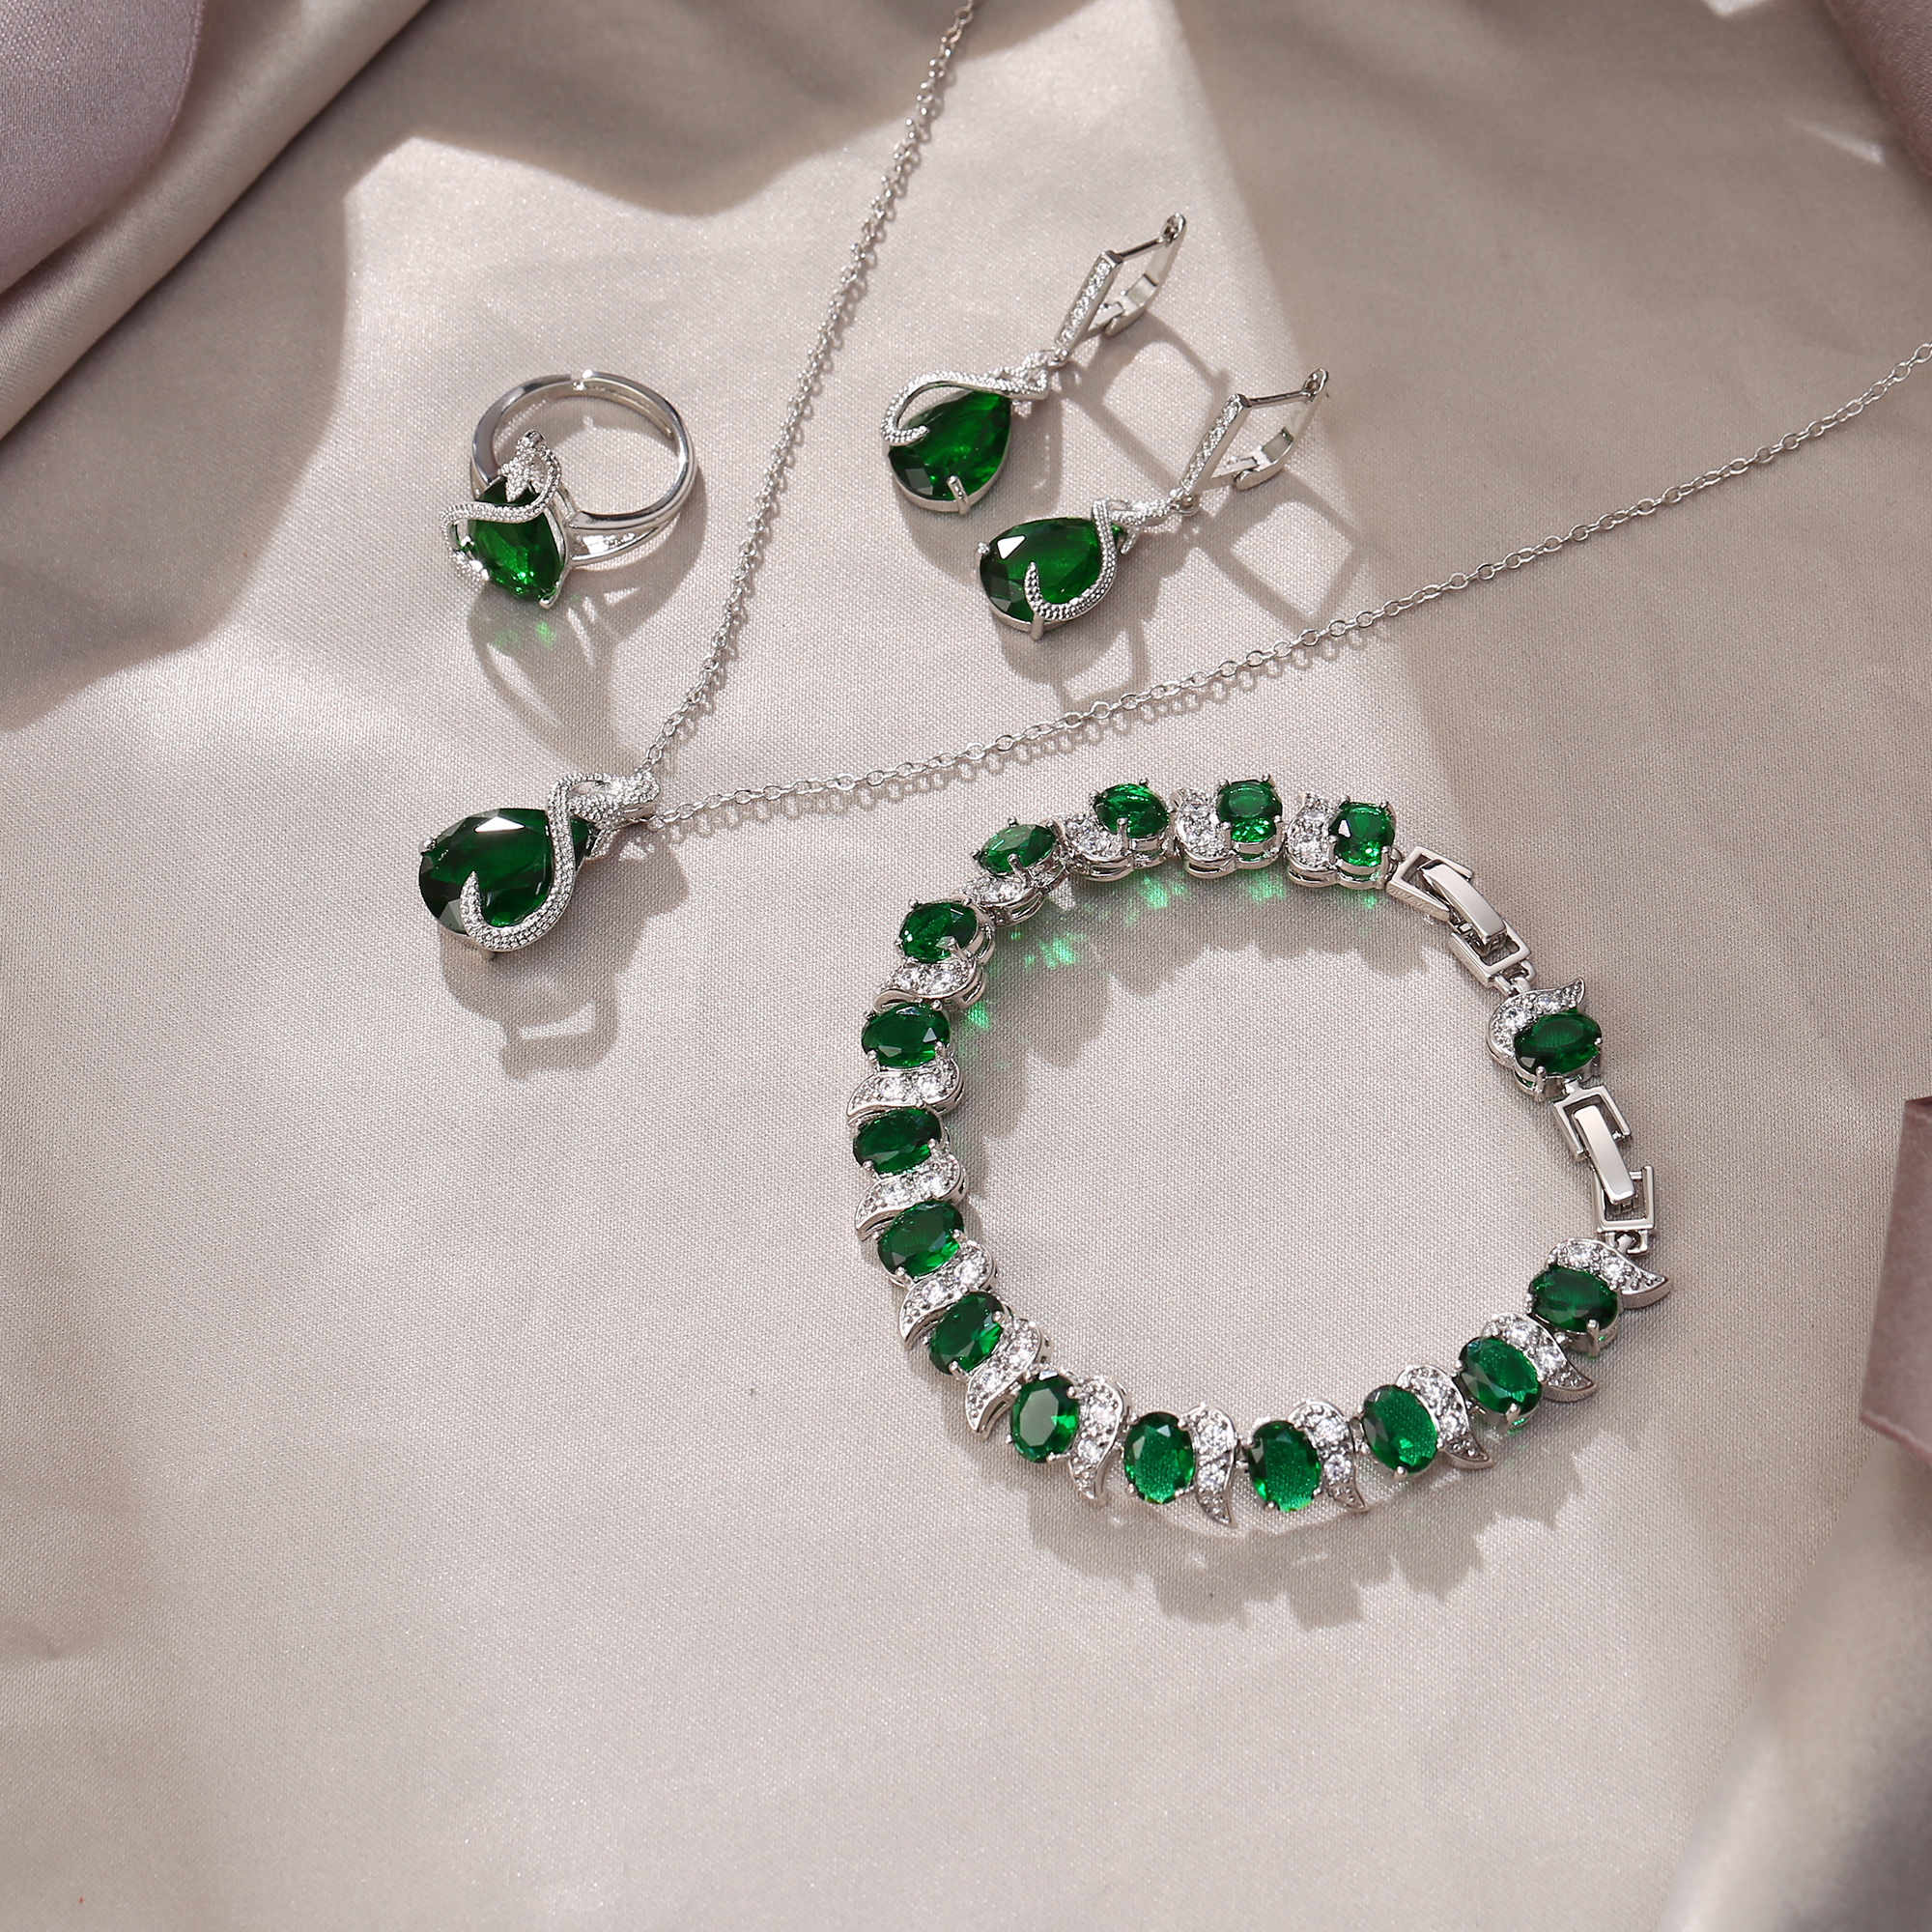 Wedure Women Bridal Jewelry Set for Bride, Emerald Birthstone CZ Necklace Earrings Bracelet Ring Sets for Birthday/Mother's Day Gifts for Women Green Silver-Tone - image 4 of 5